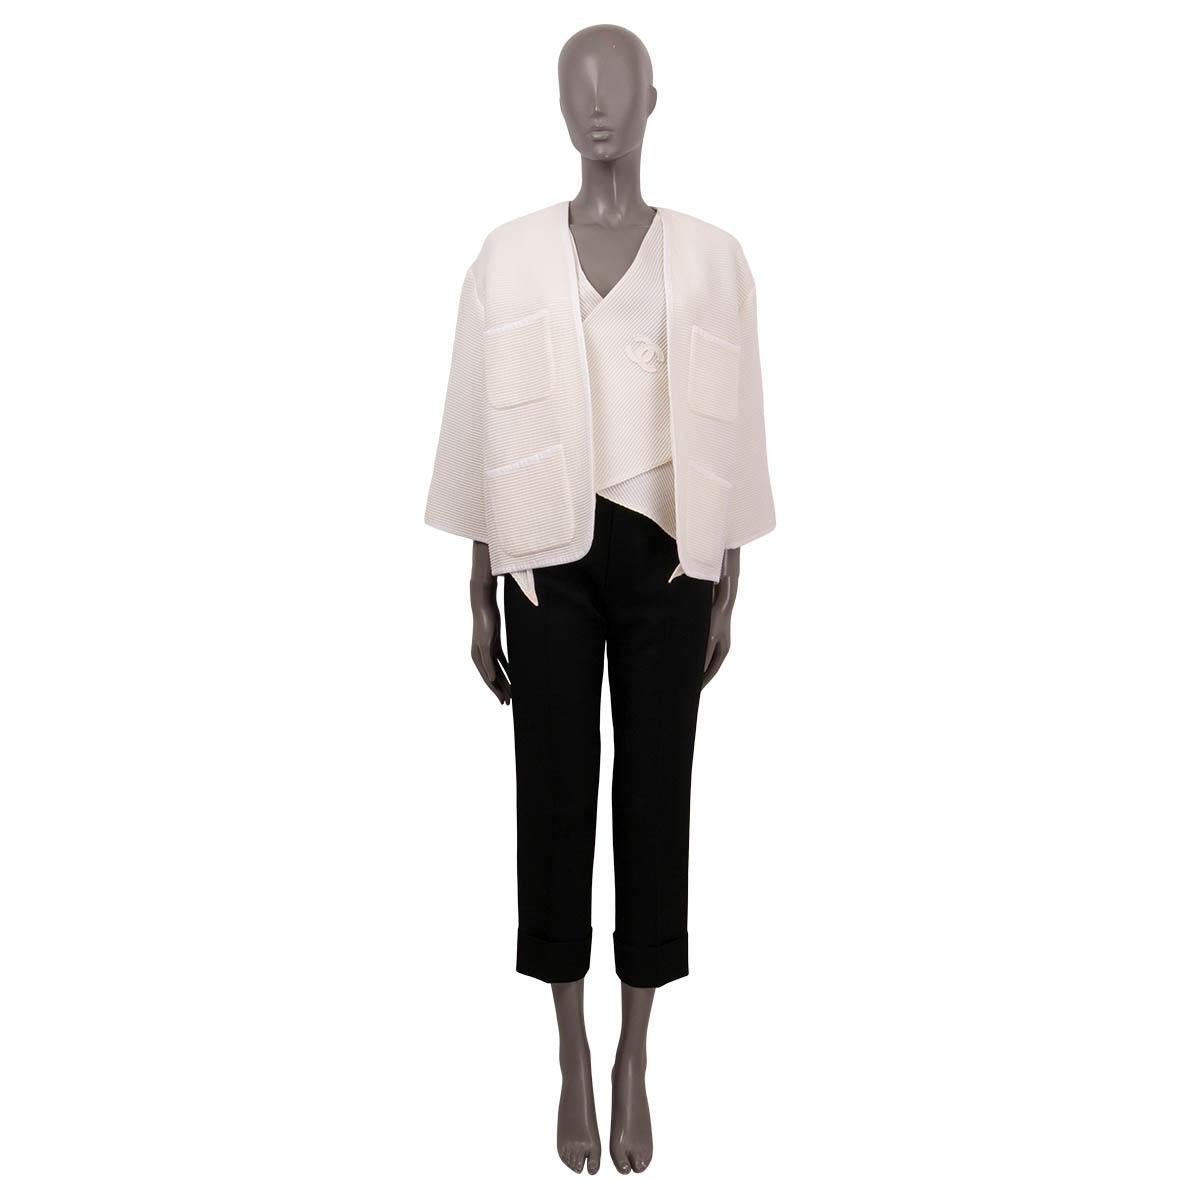 100% authentic Chanel layered knit jacket in ivory cotton (81%) and polyamide (19%). Double lined in ivory colored silk (100%). Features 3/4 sleeves, four slit pockets in the front and a ivory colored vest underneath, which is attached inside on the